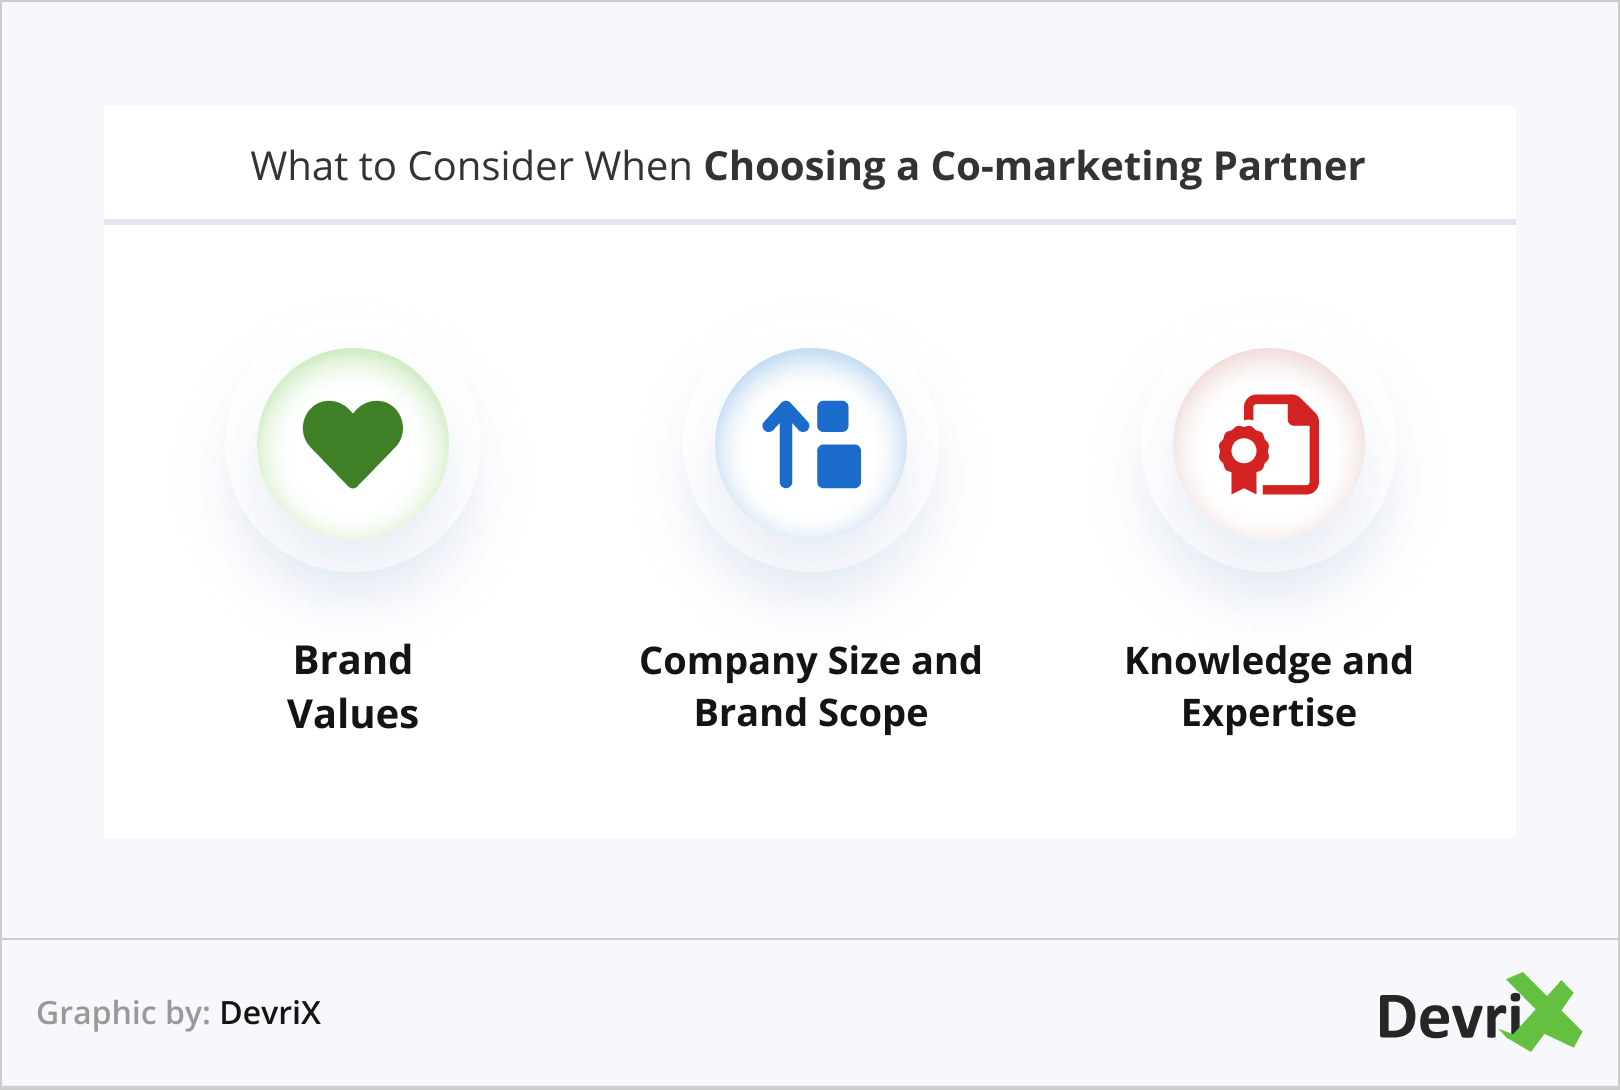 What to Consider When Choosing a Co-marketing Partner